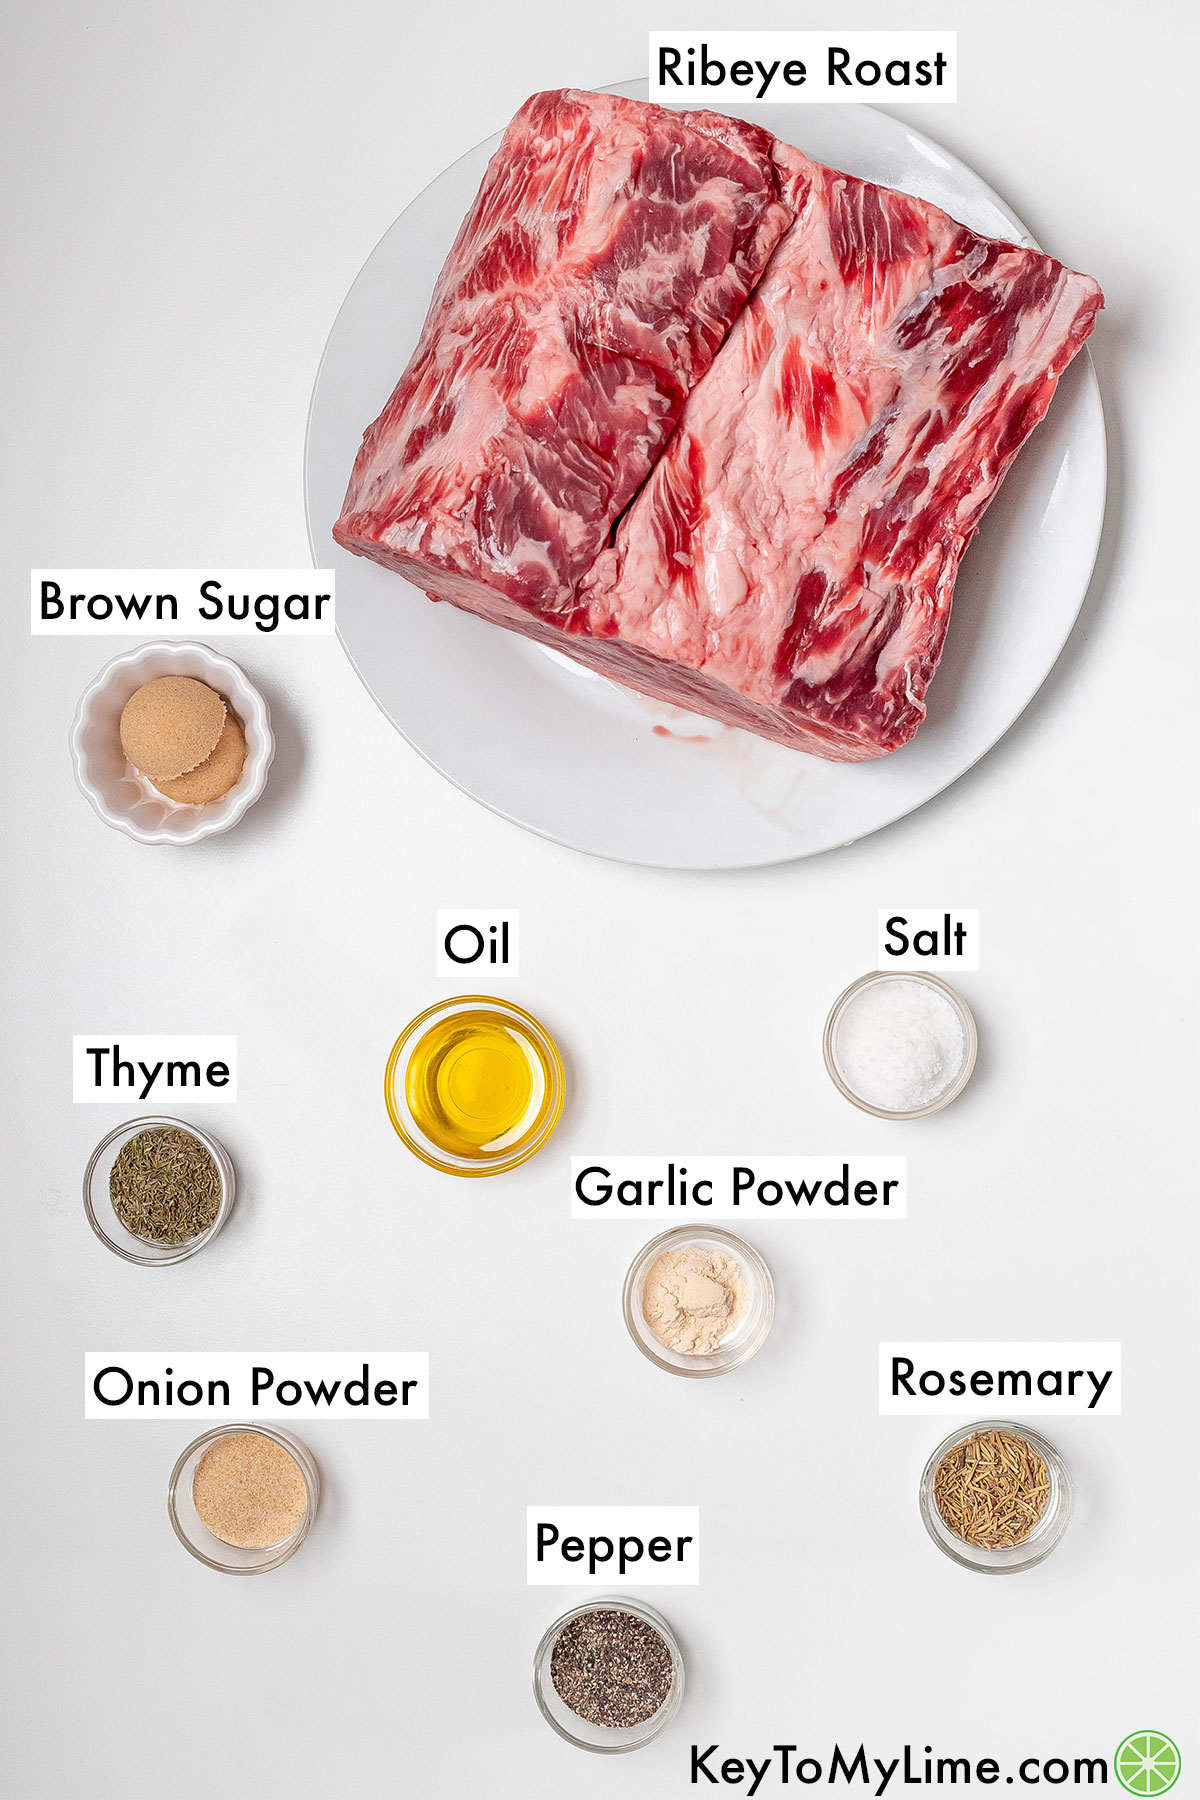 The labeled ingredients for ribeye roast.